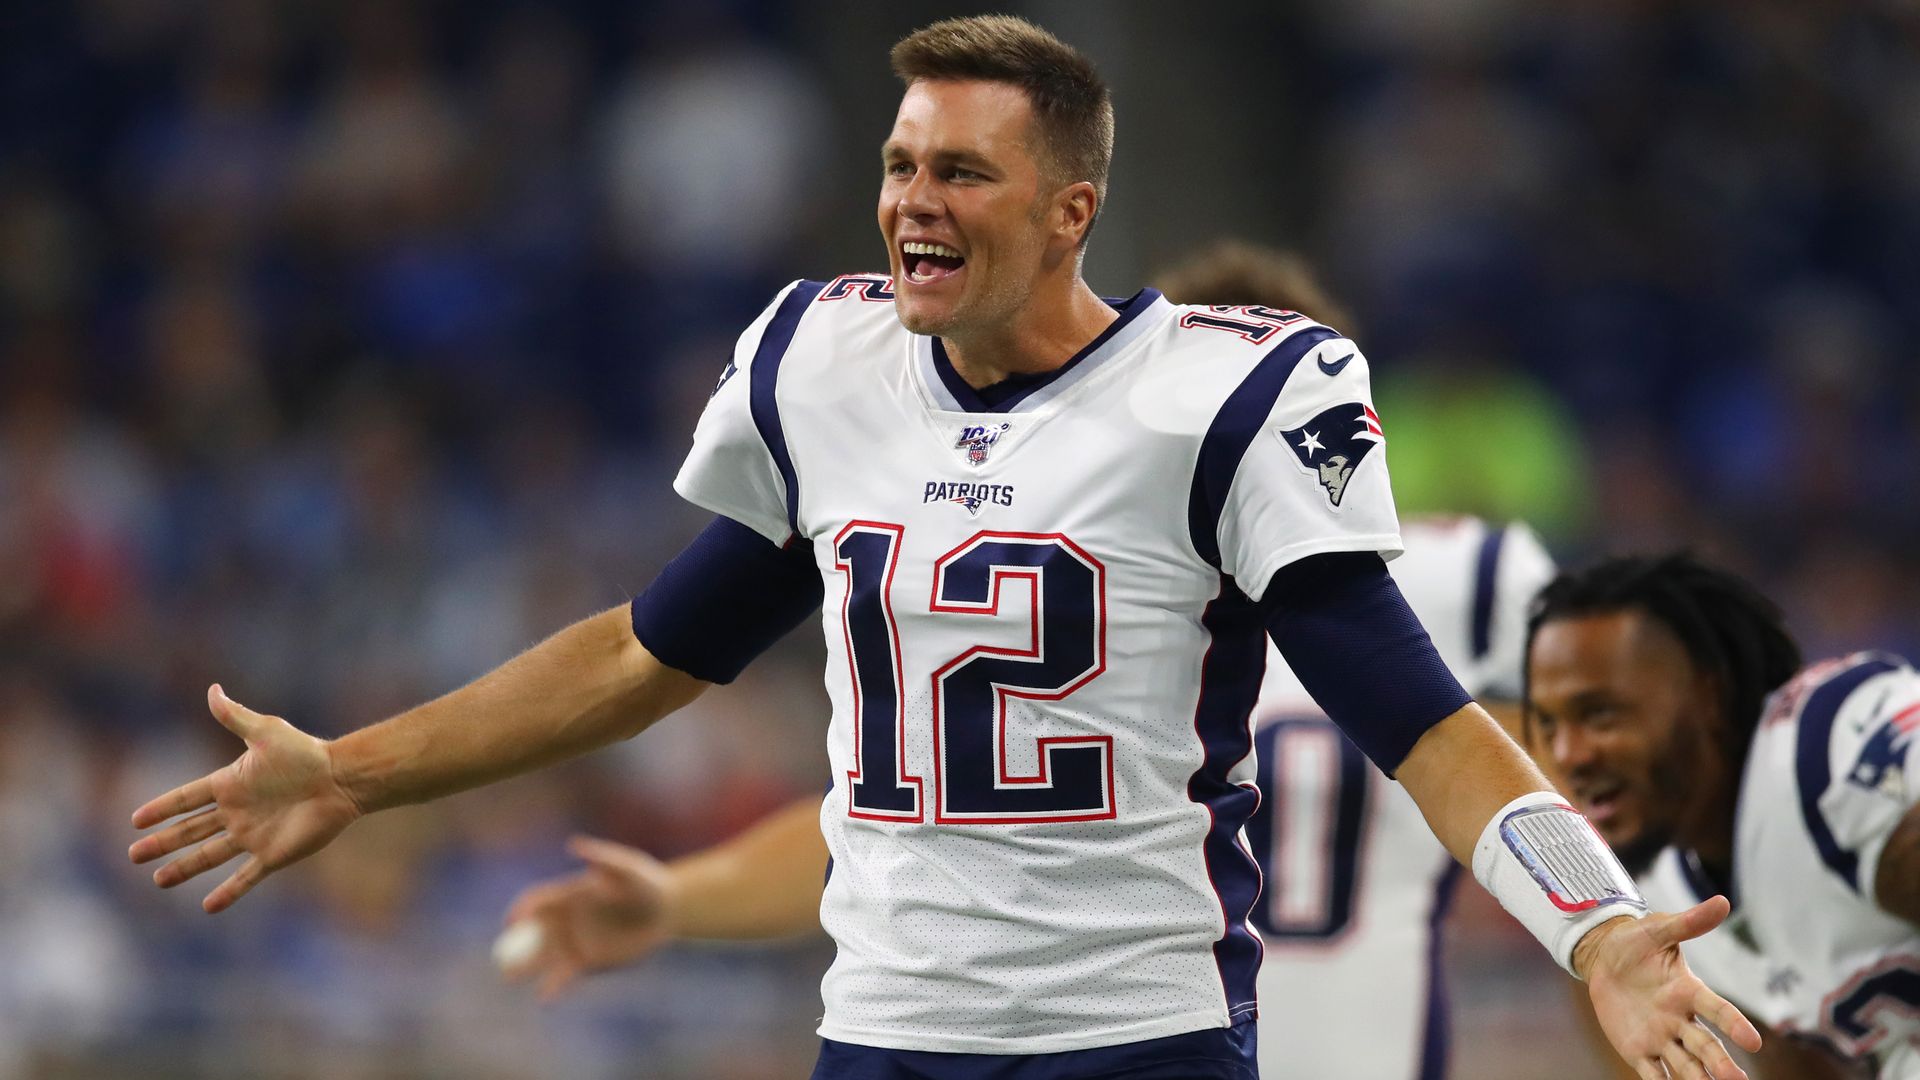 Tom Brady #12 of the New England Patriots reacts to his teams first quarter touchdown